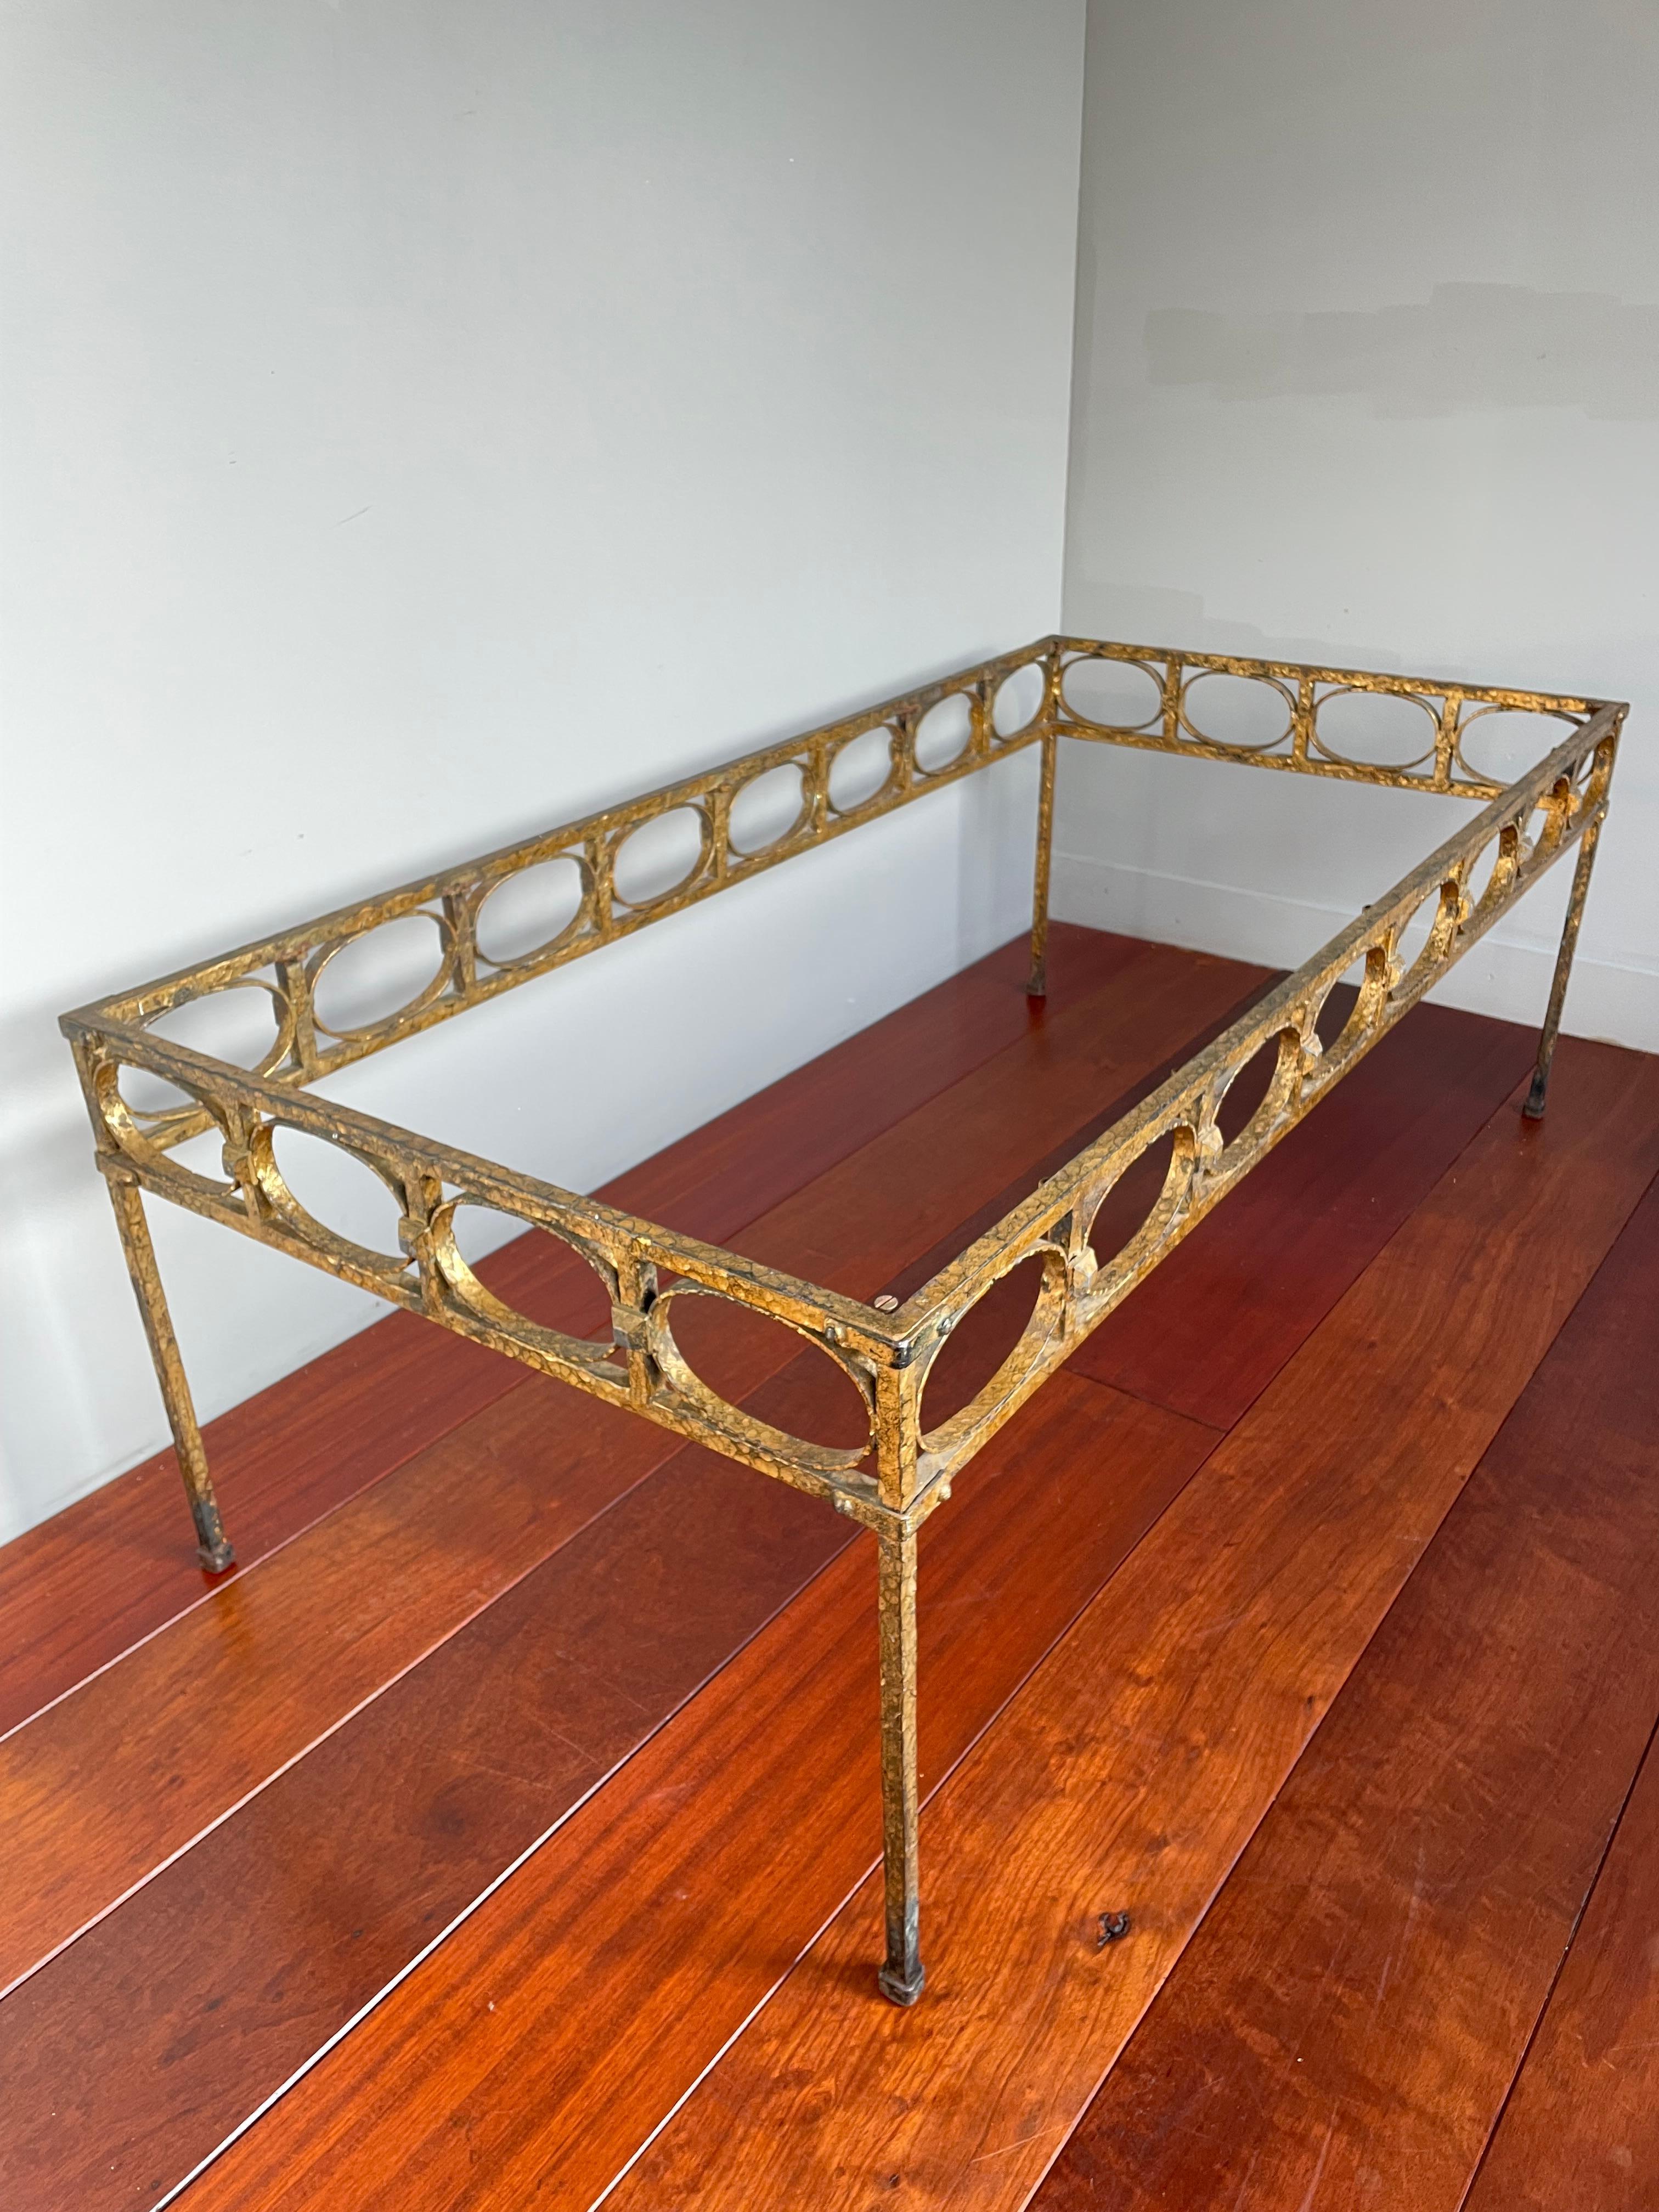 Stunning Midcentury Modern Gilt Wrought Iron Coffee Table Base by Ferro Art 1950 For Sale 9